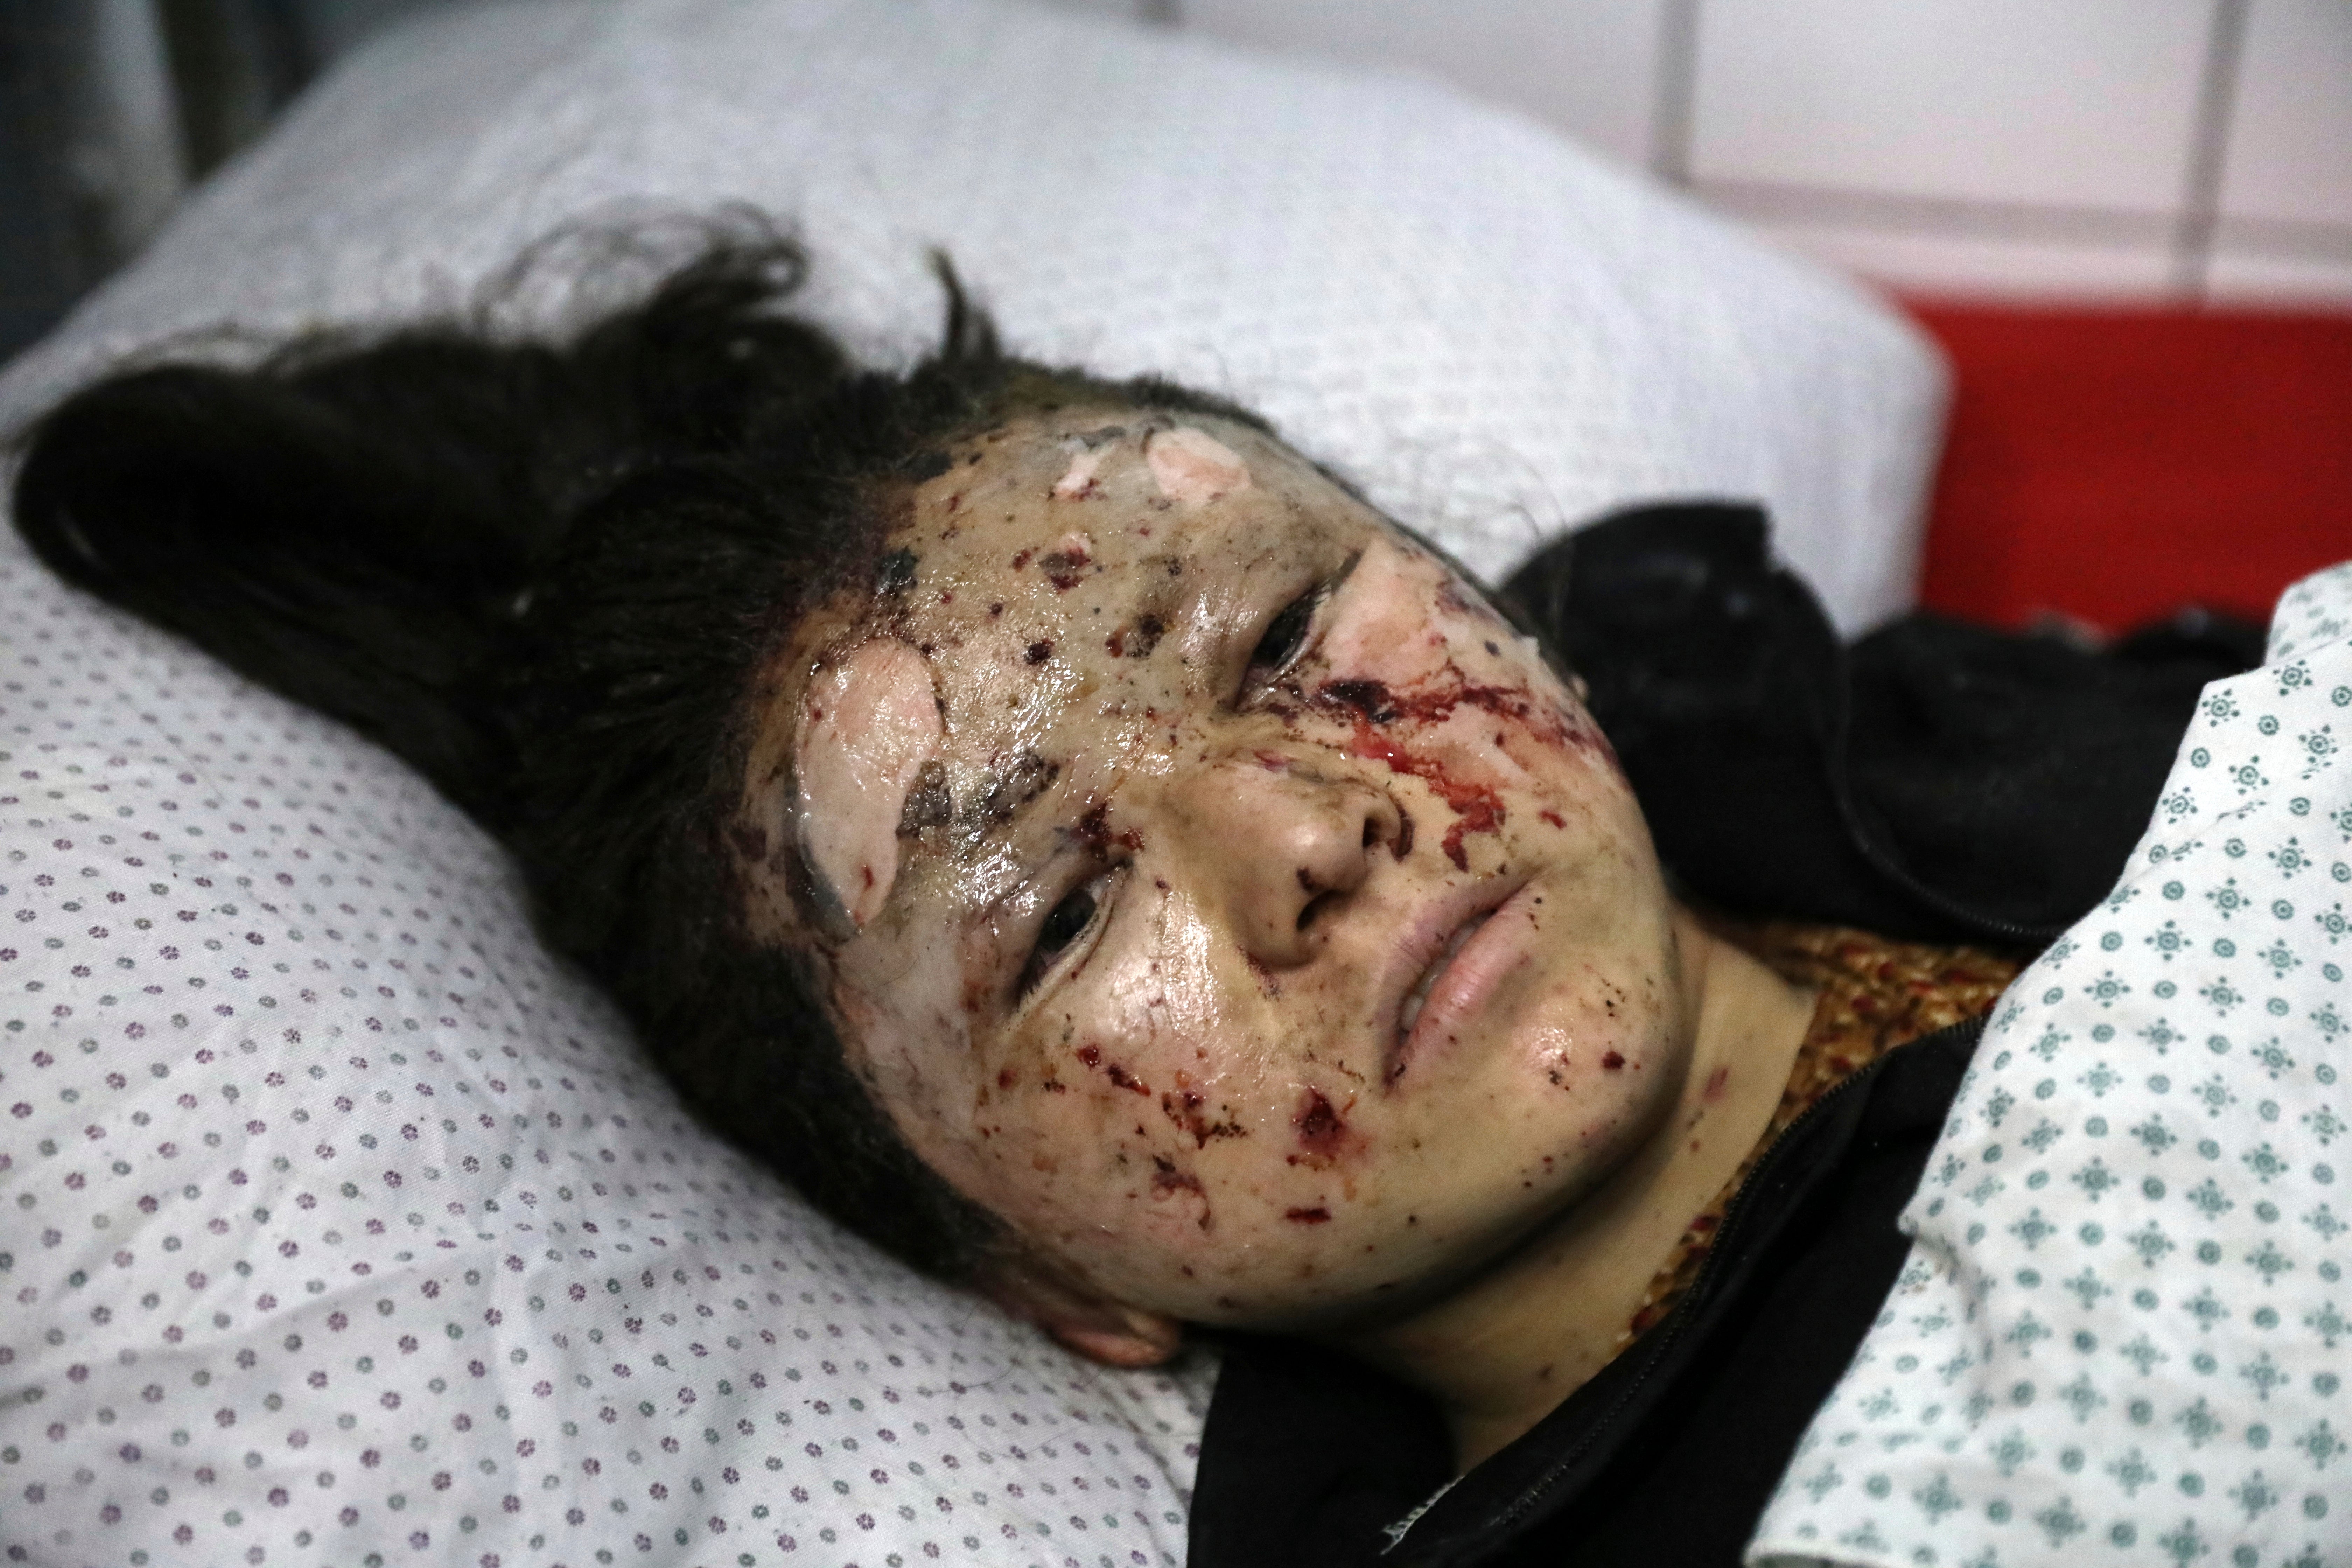 A schoolgirl is treated at a hospital after the bomb near a school in Kabul